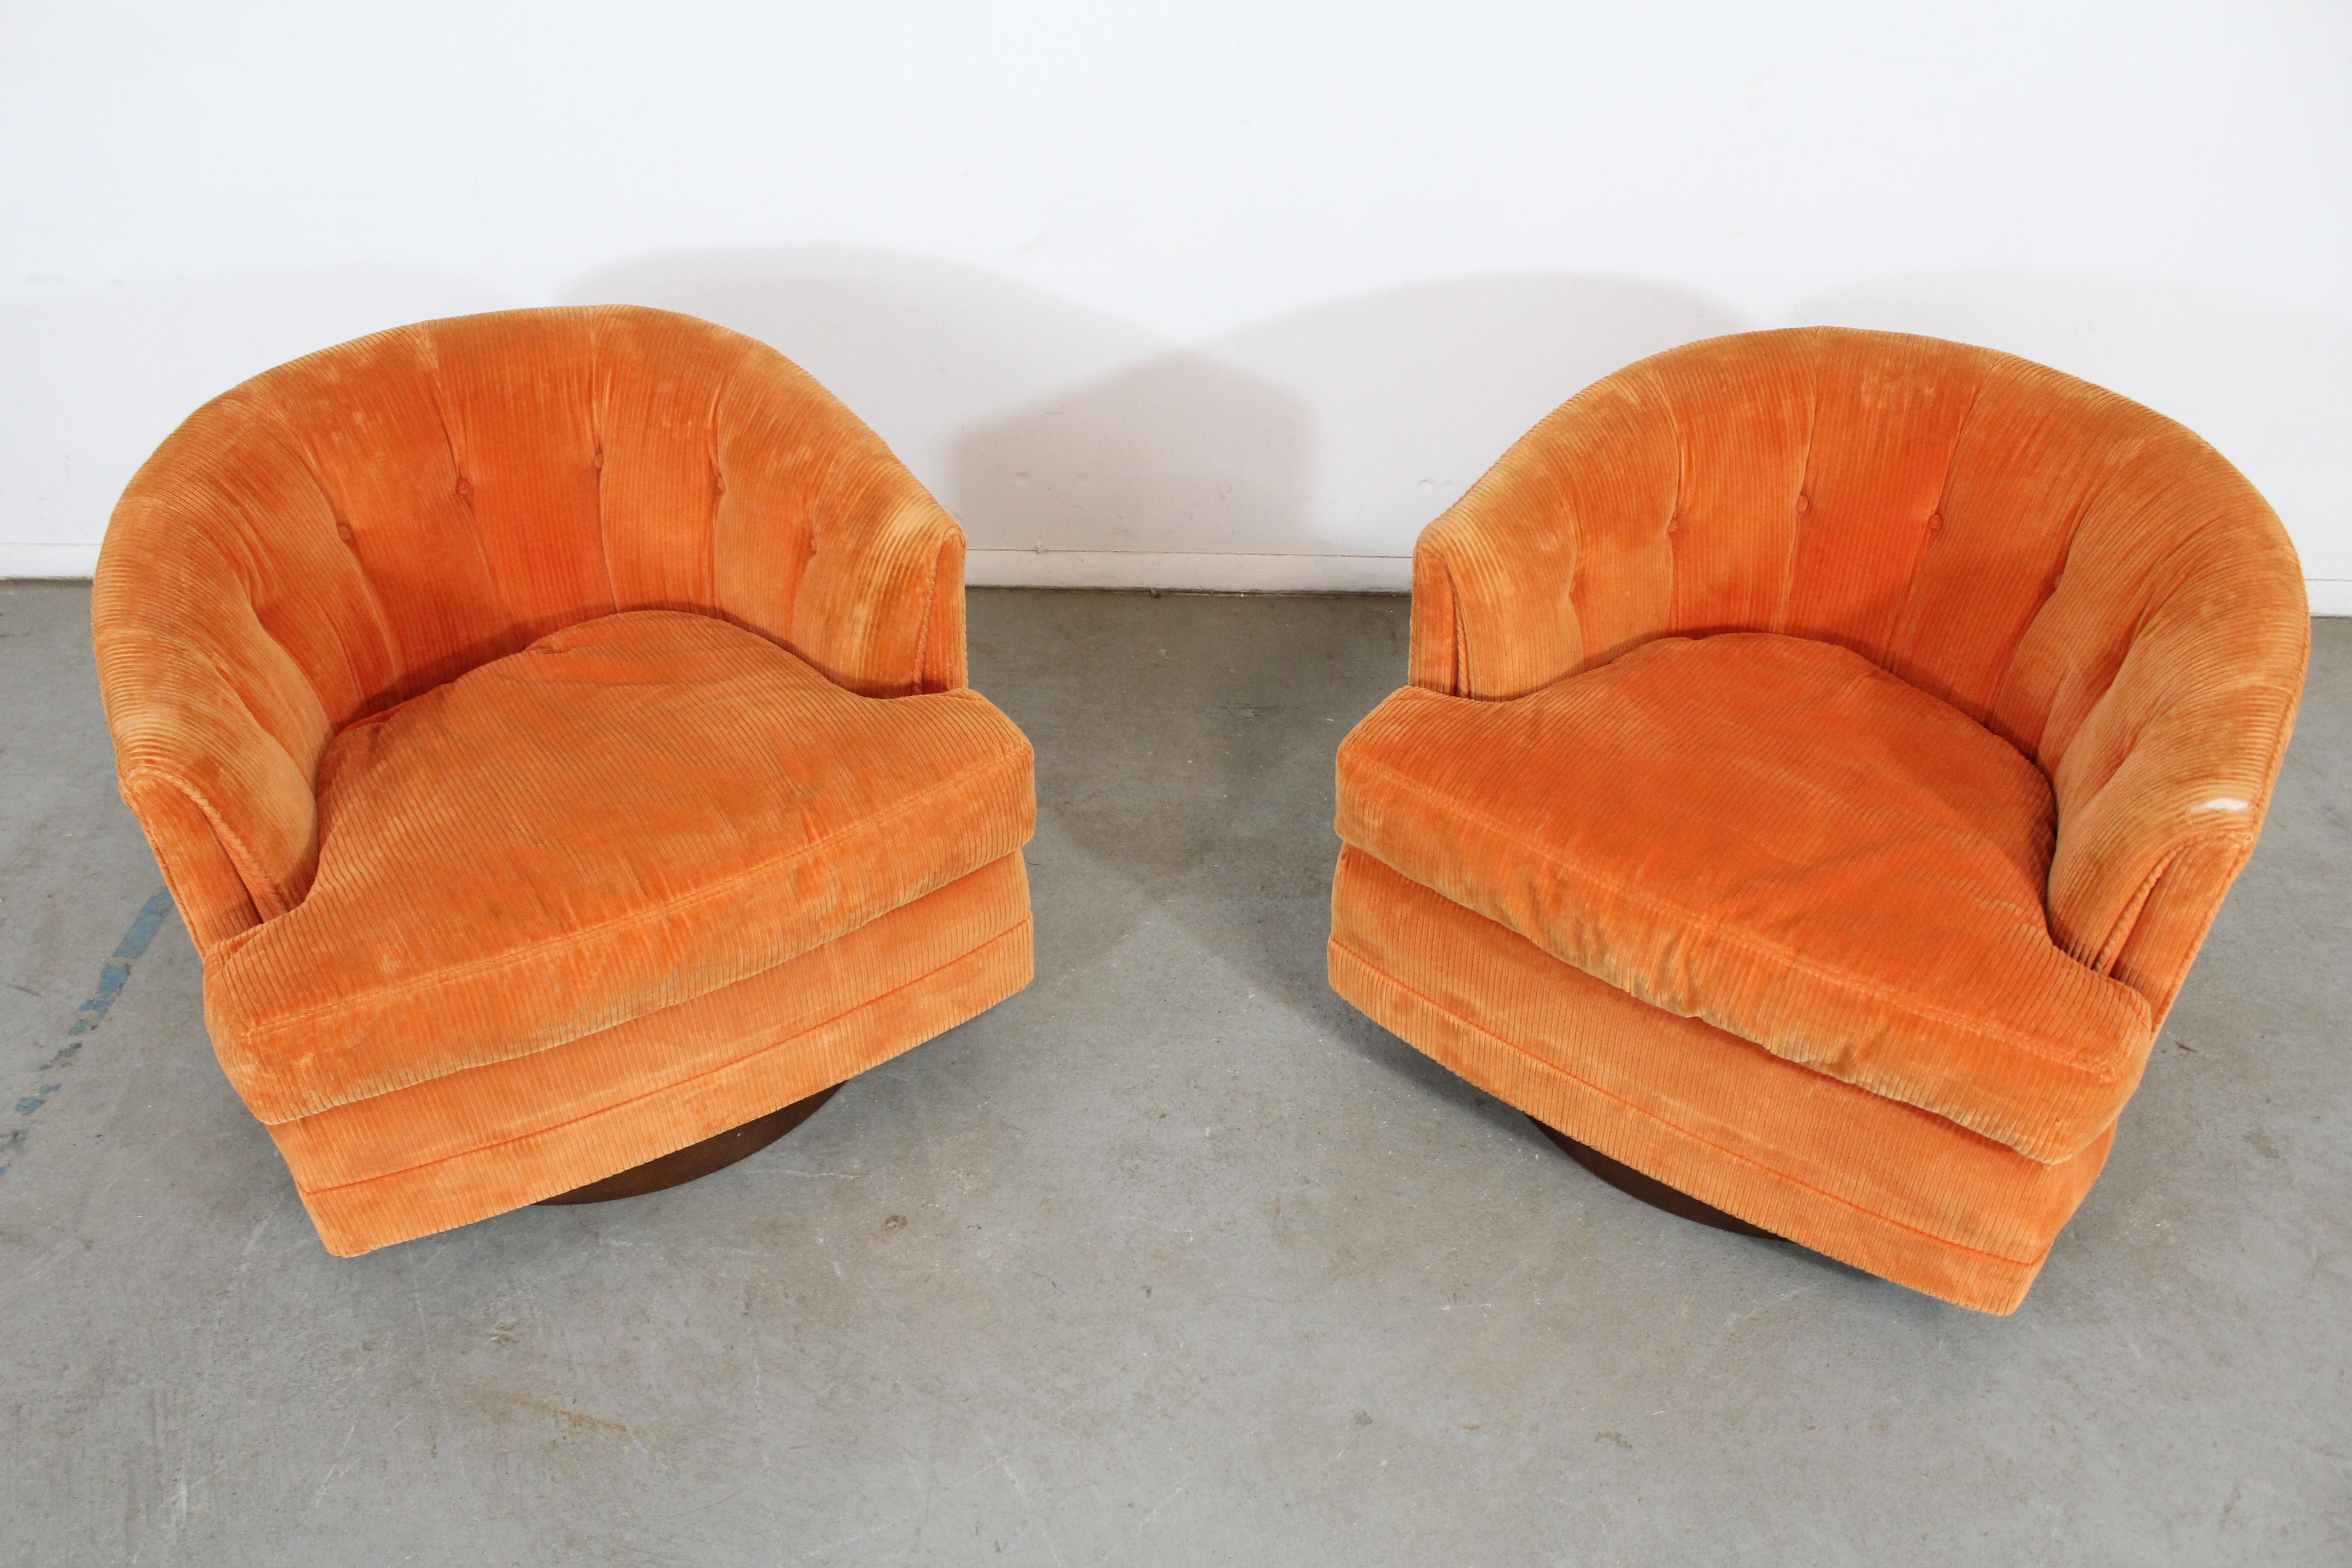 Pair of Mid-Century Modern Selig Barrel Back Swivel Club Chairs on Walnut Base For Sale 3